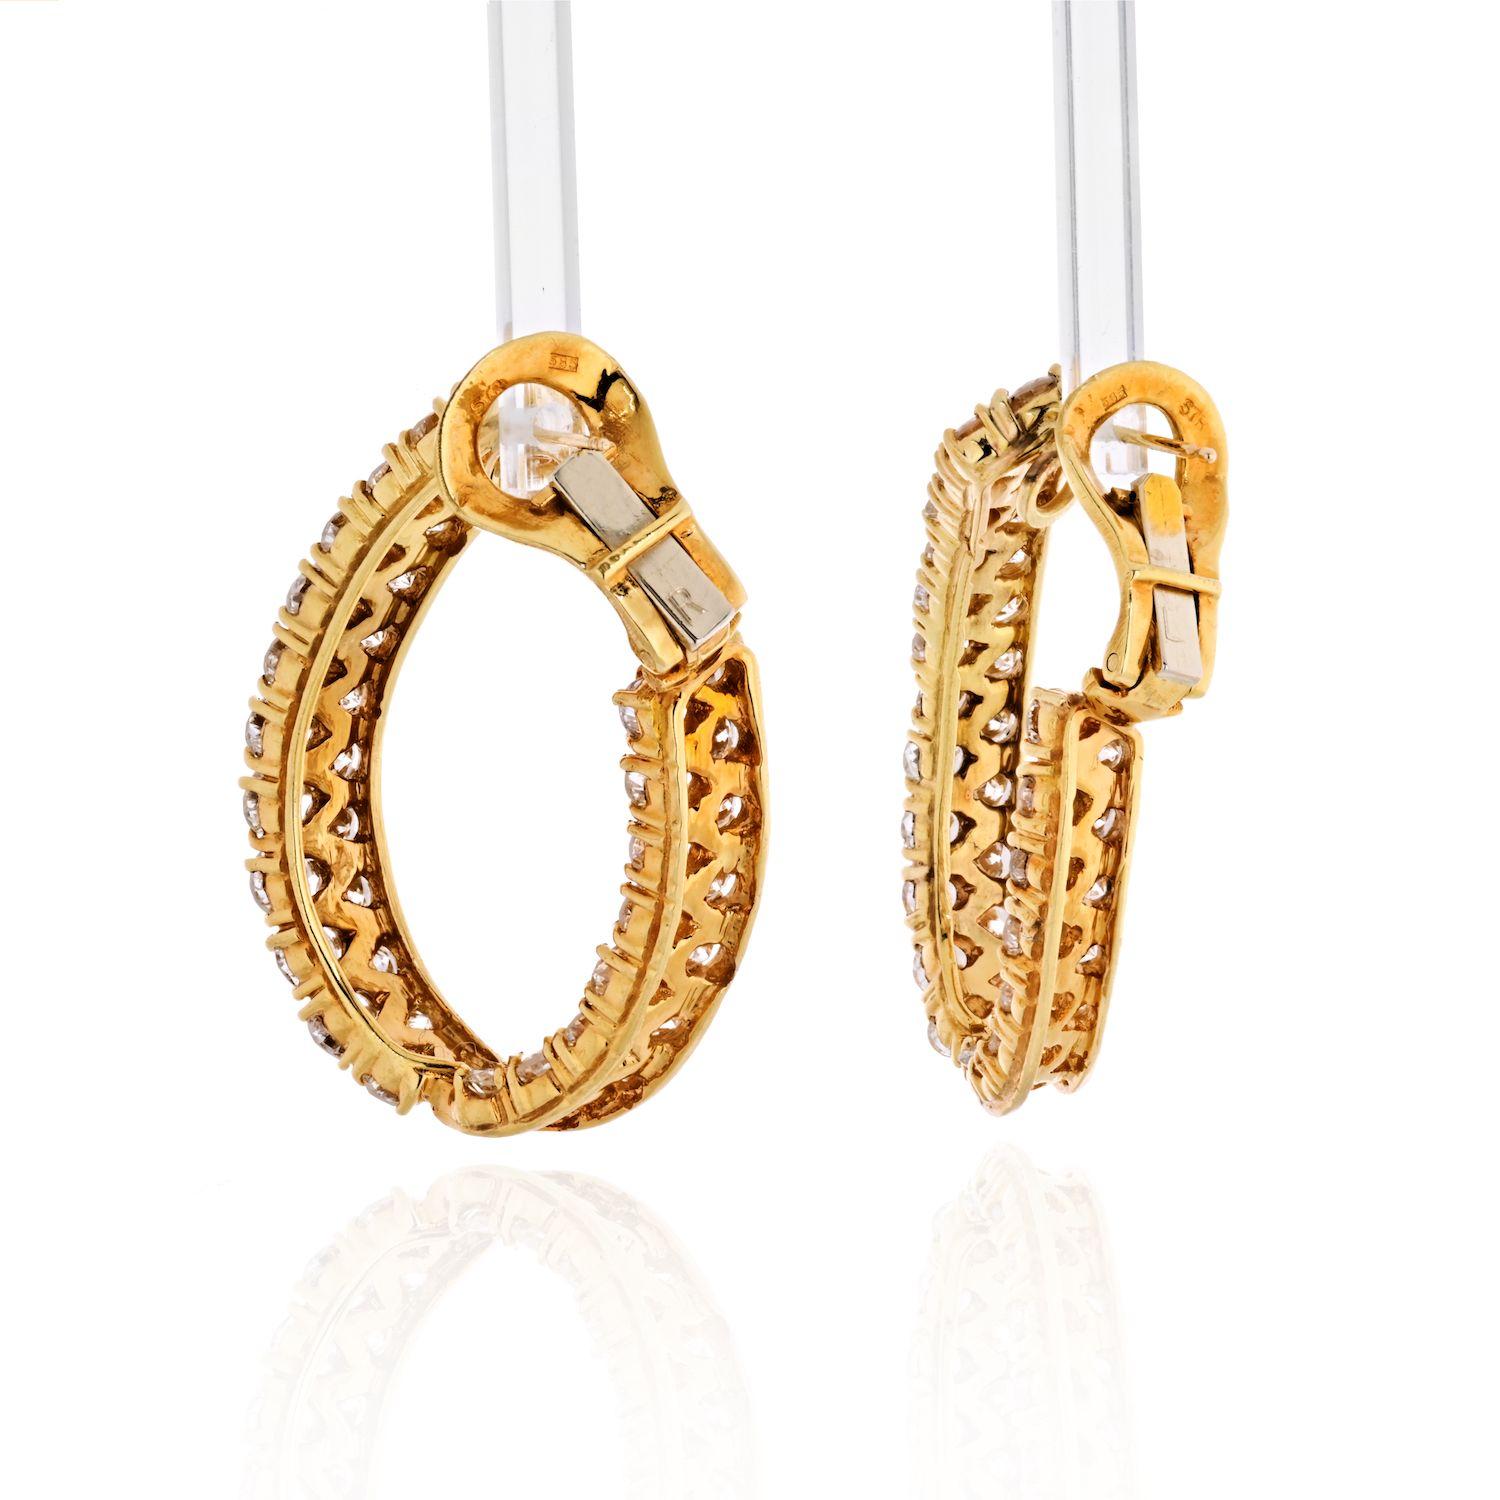 Brilliant Cut 10.00 Carat Inside and Out 18 Karat Yellow Gold Diamond Hoop Earrings For Sale